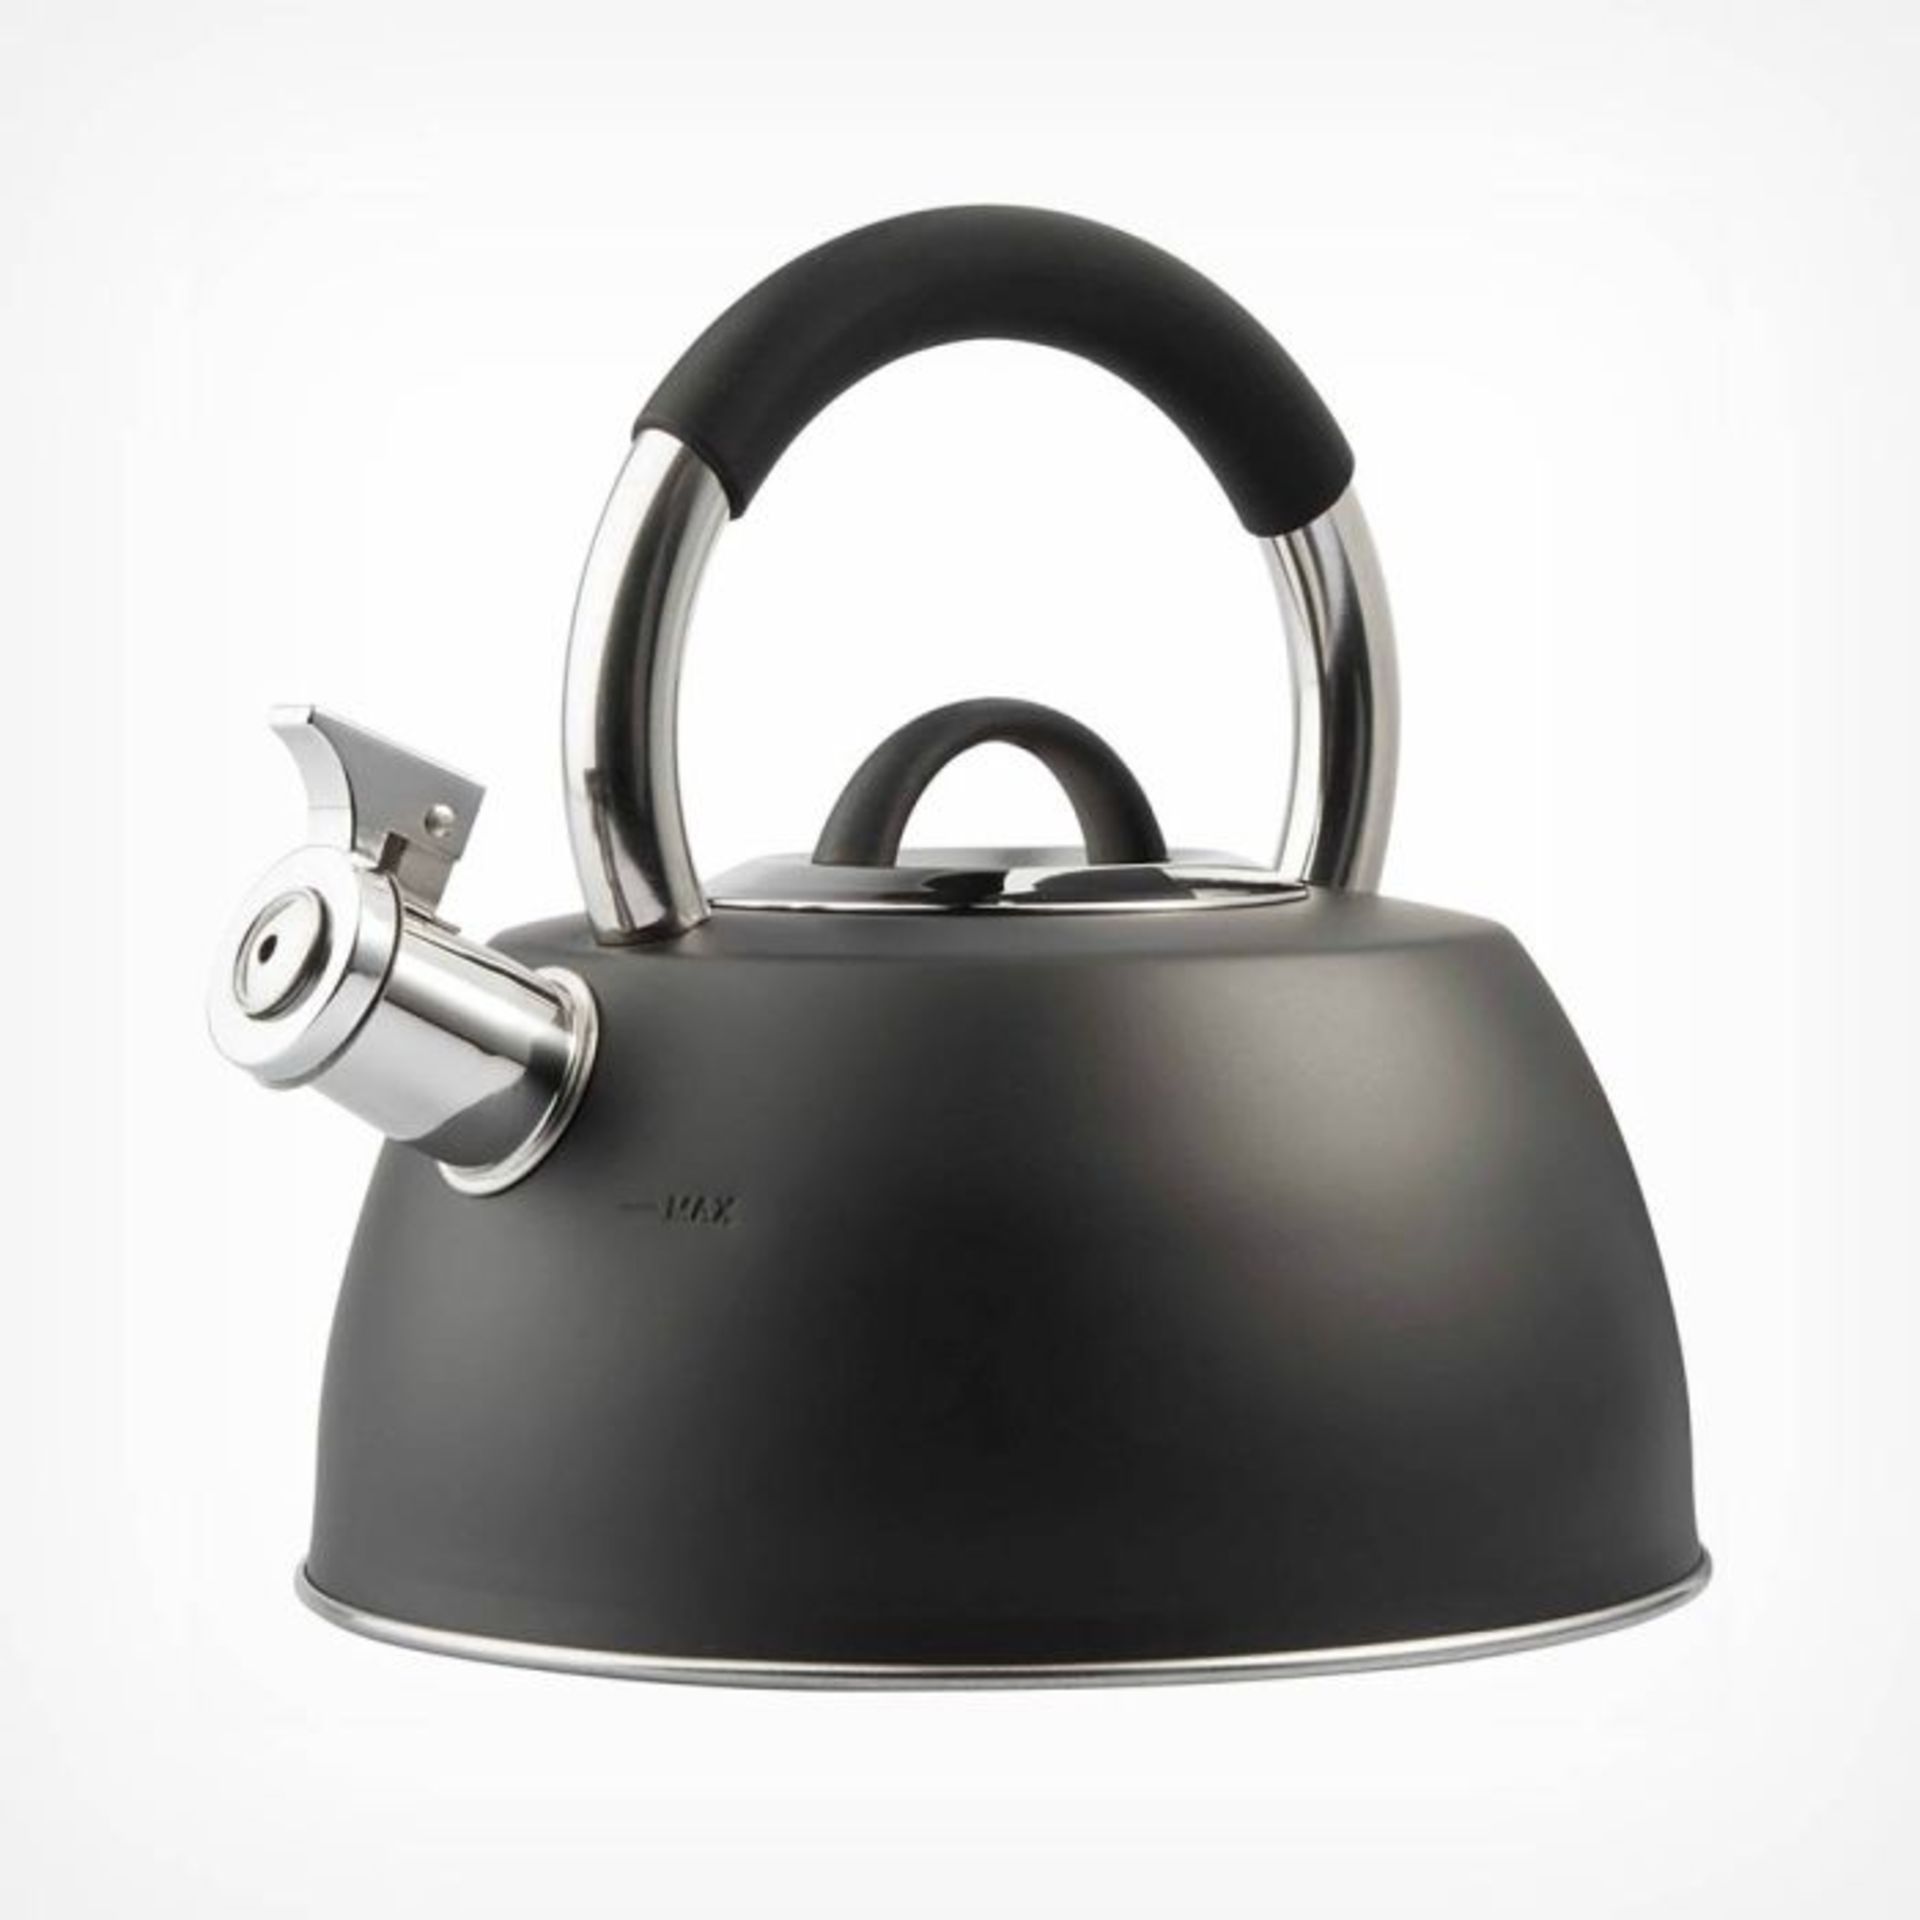 2.5L Black Whistling Stove Top Kettle. - ER36. Constructed using stainless steel for its superior